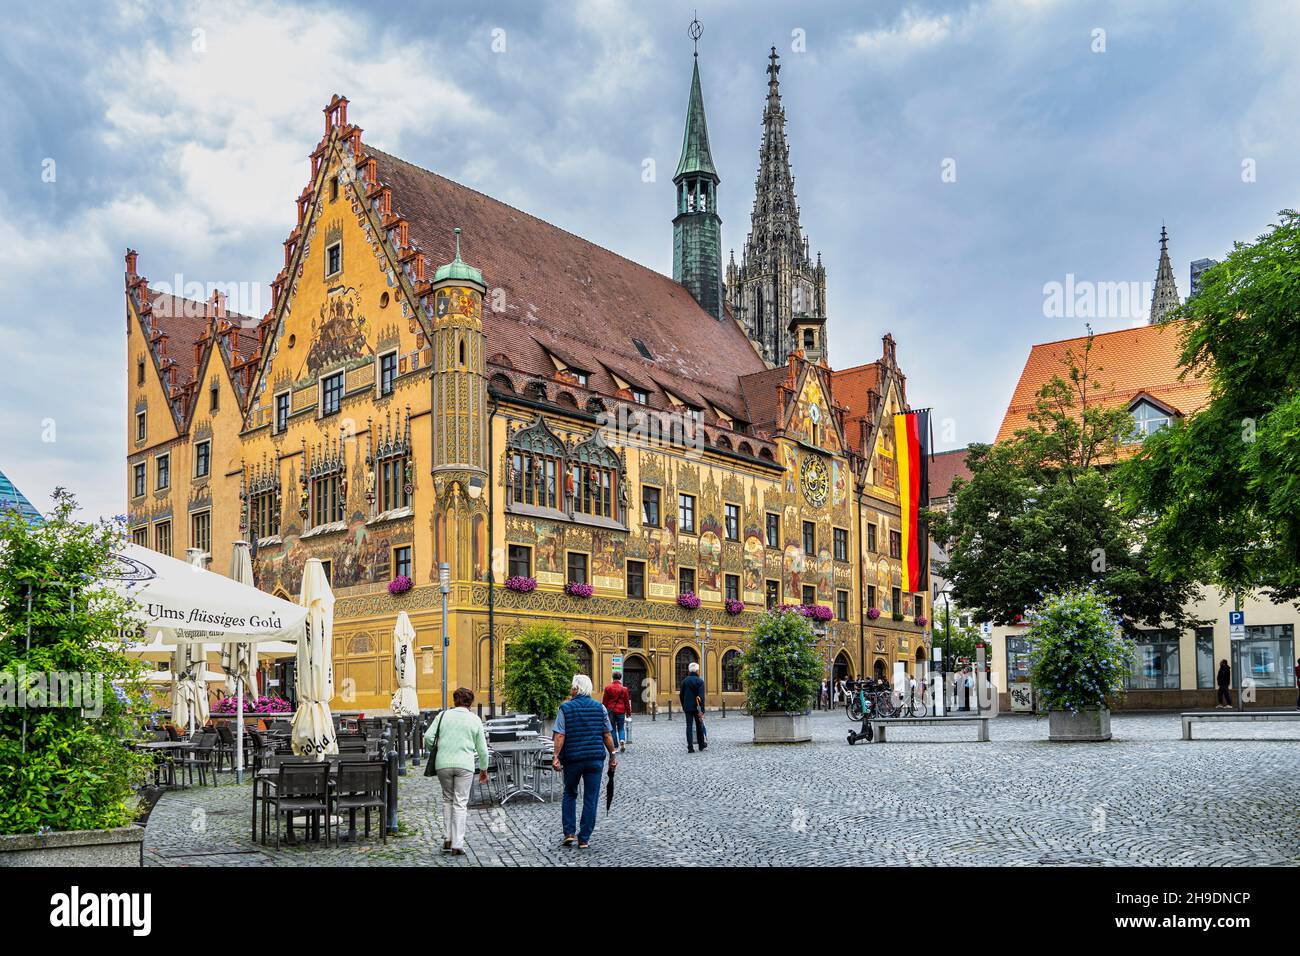 Ancient palace, now the town hall, from the Renaissance period, known for its frescoed exterior and the astronomical clock. Ulm, Tübingen, Germany Stock Photo